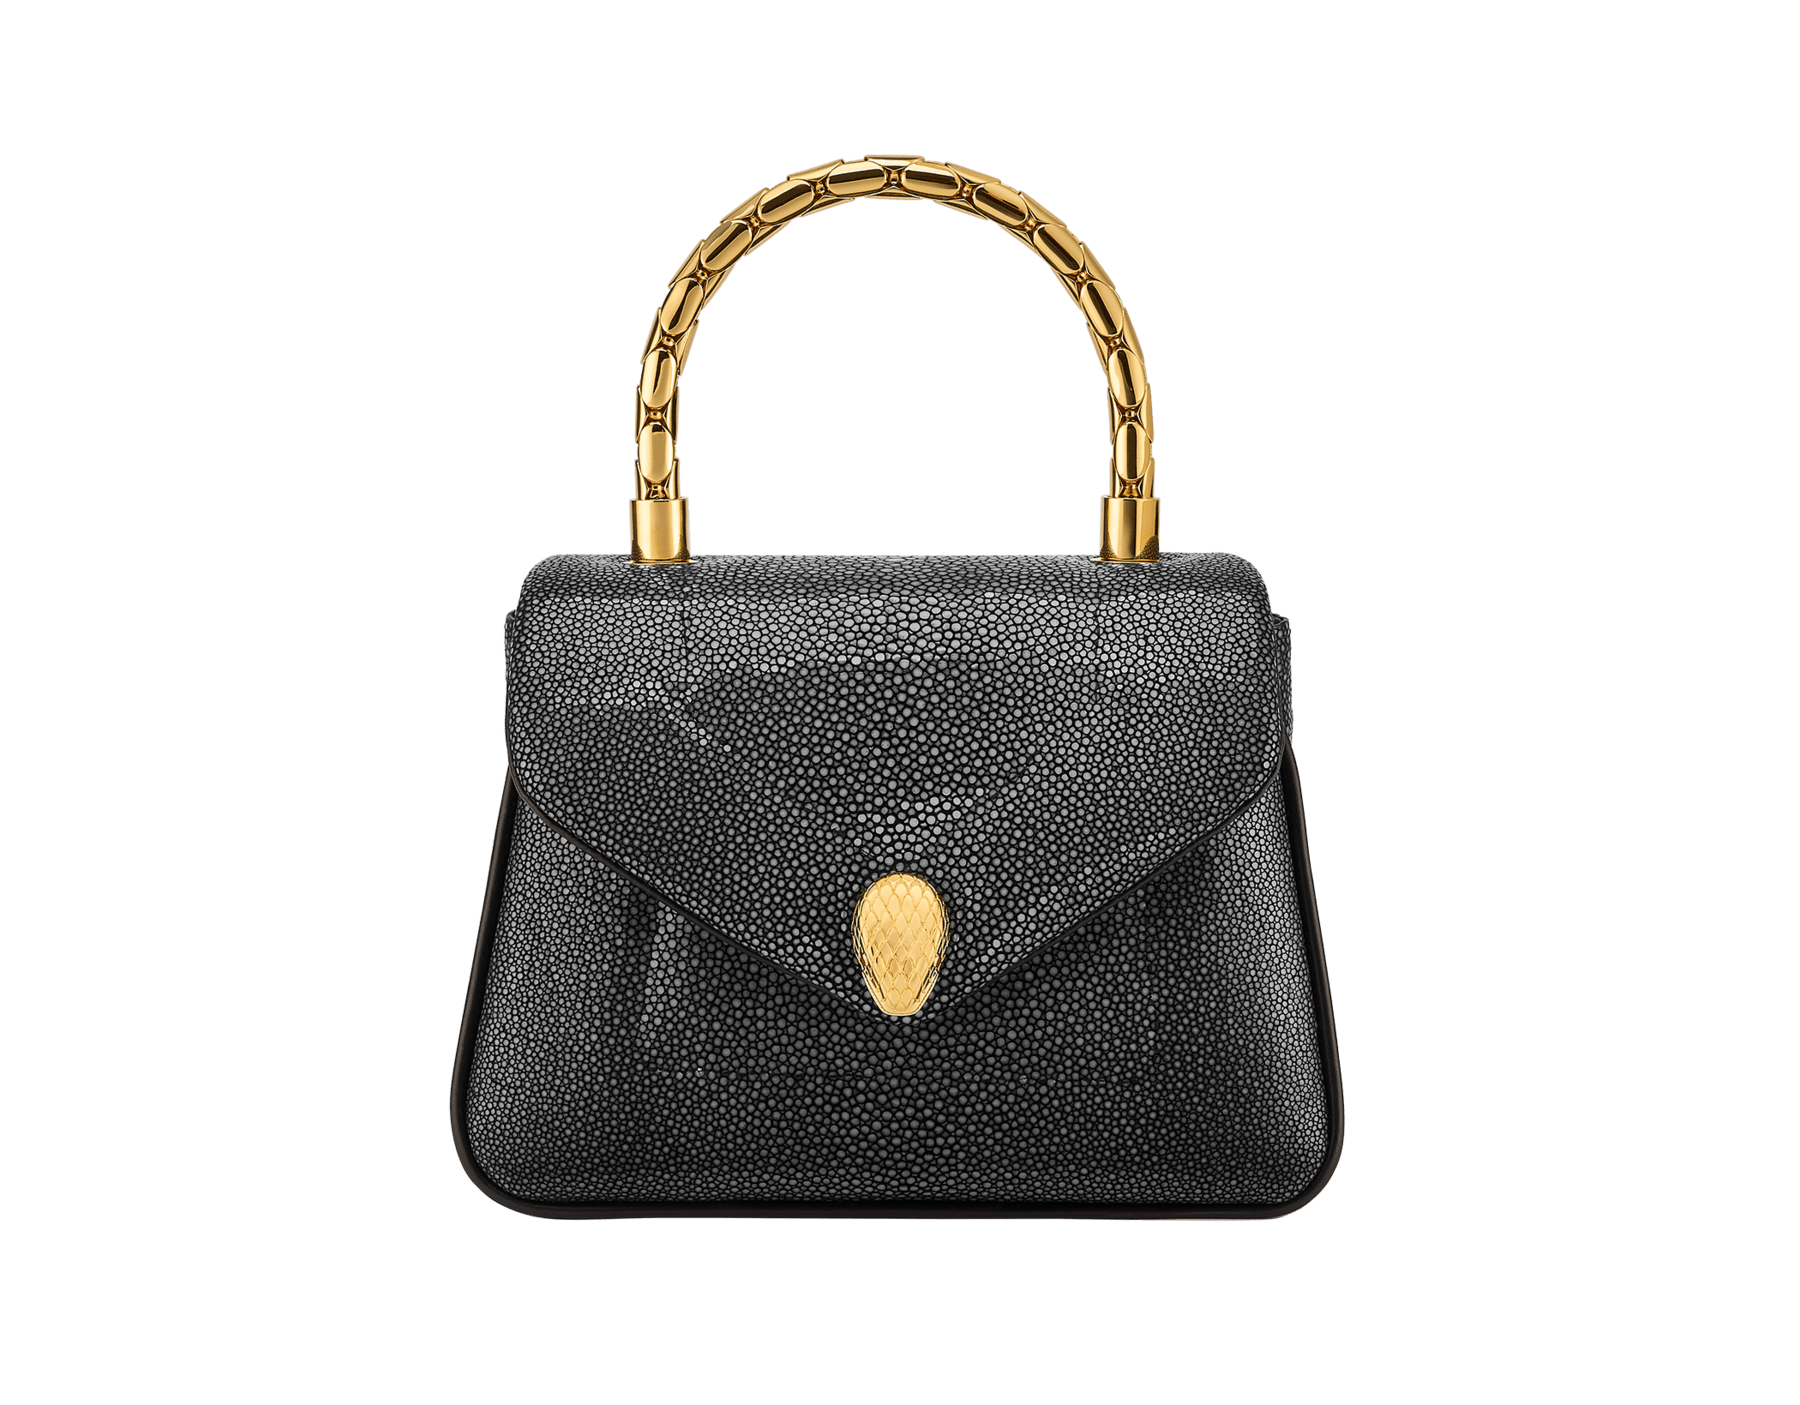 Serpenti Reverse small top handle bag in soft emerald green galuchat skin with amethyst purple nappa leather lining. Captivating magnetic snakehead closure in light gold-plated brass embellished with red enamel eyes. 1234-SG image 1